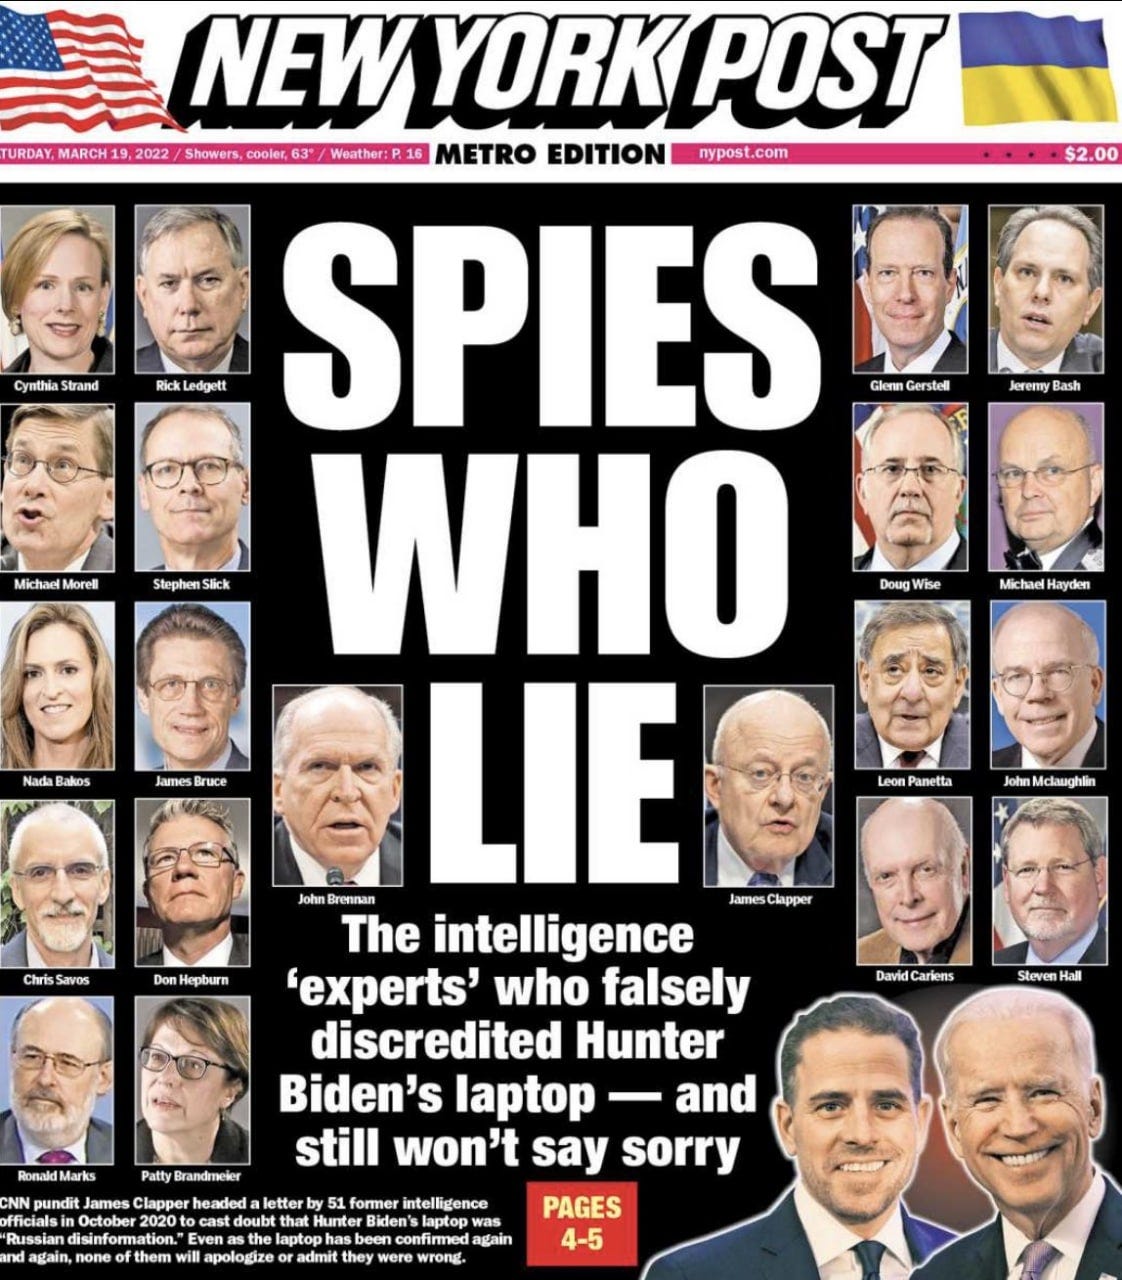 Spies who lie: 51 'intelligence' experts refuse to apologize for ...